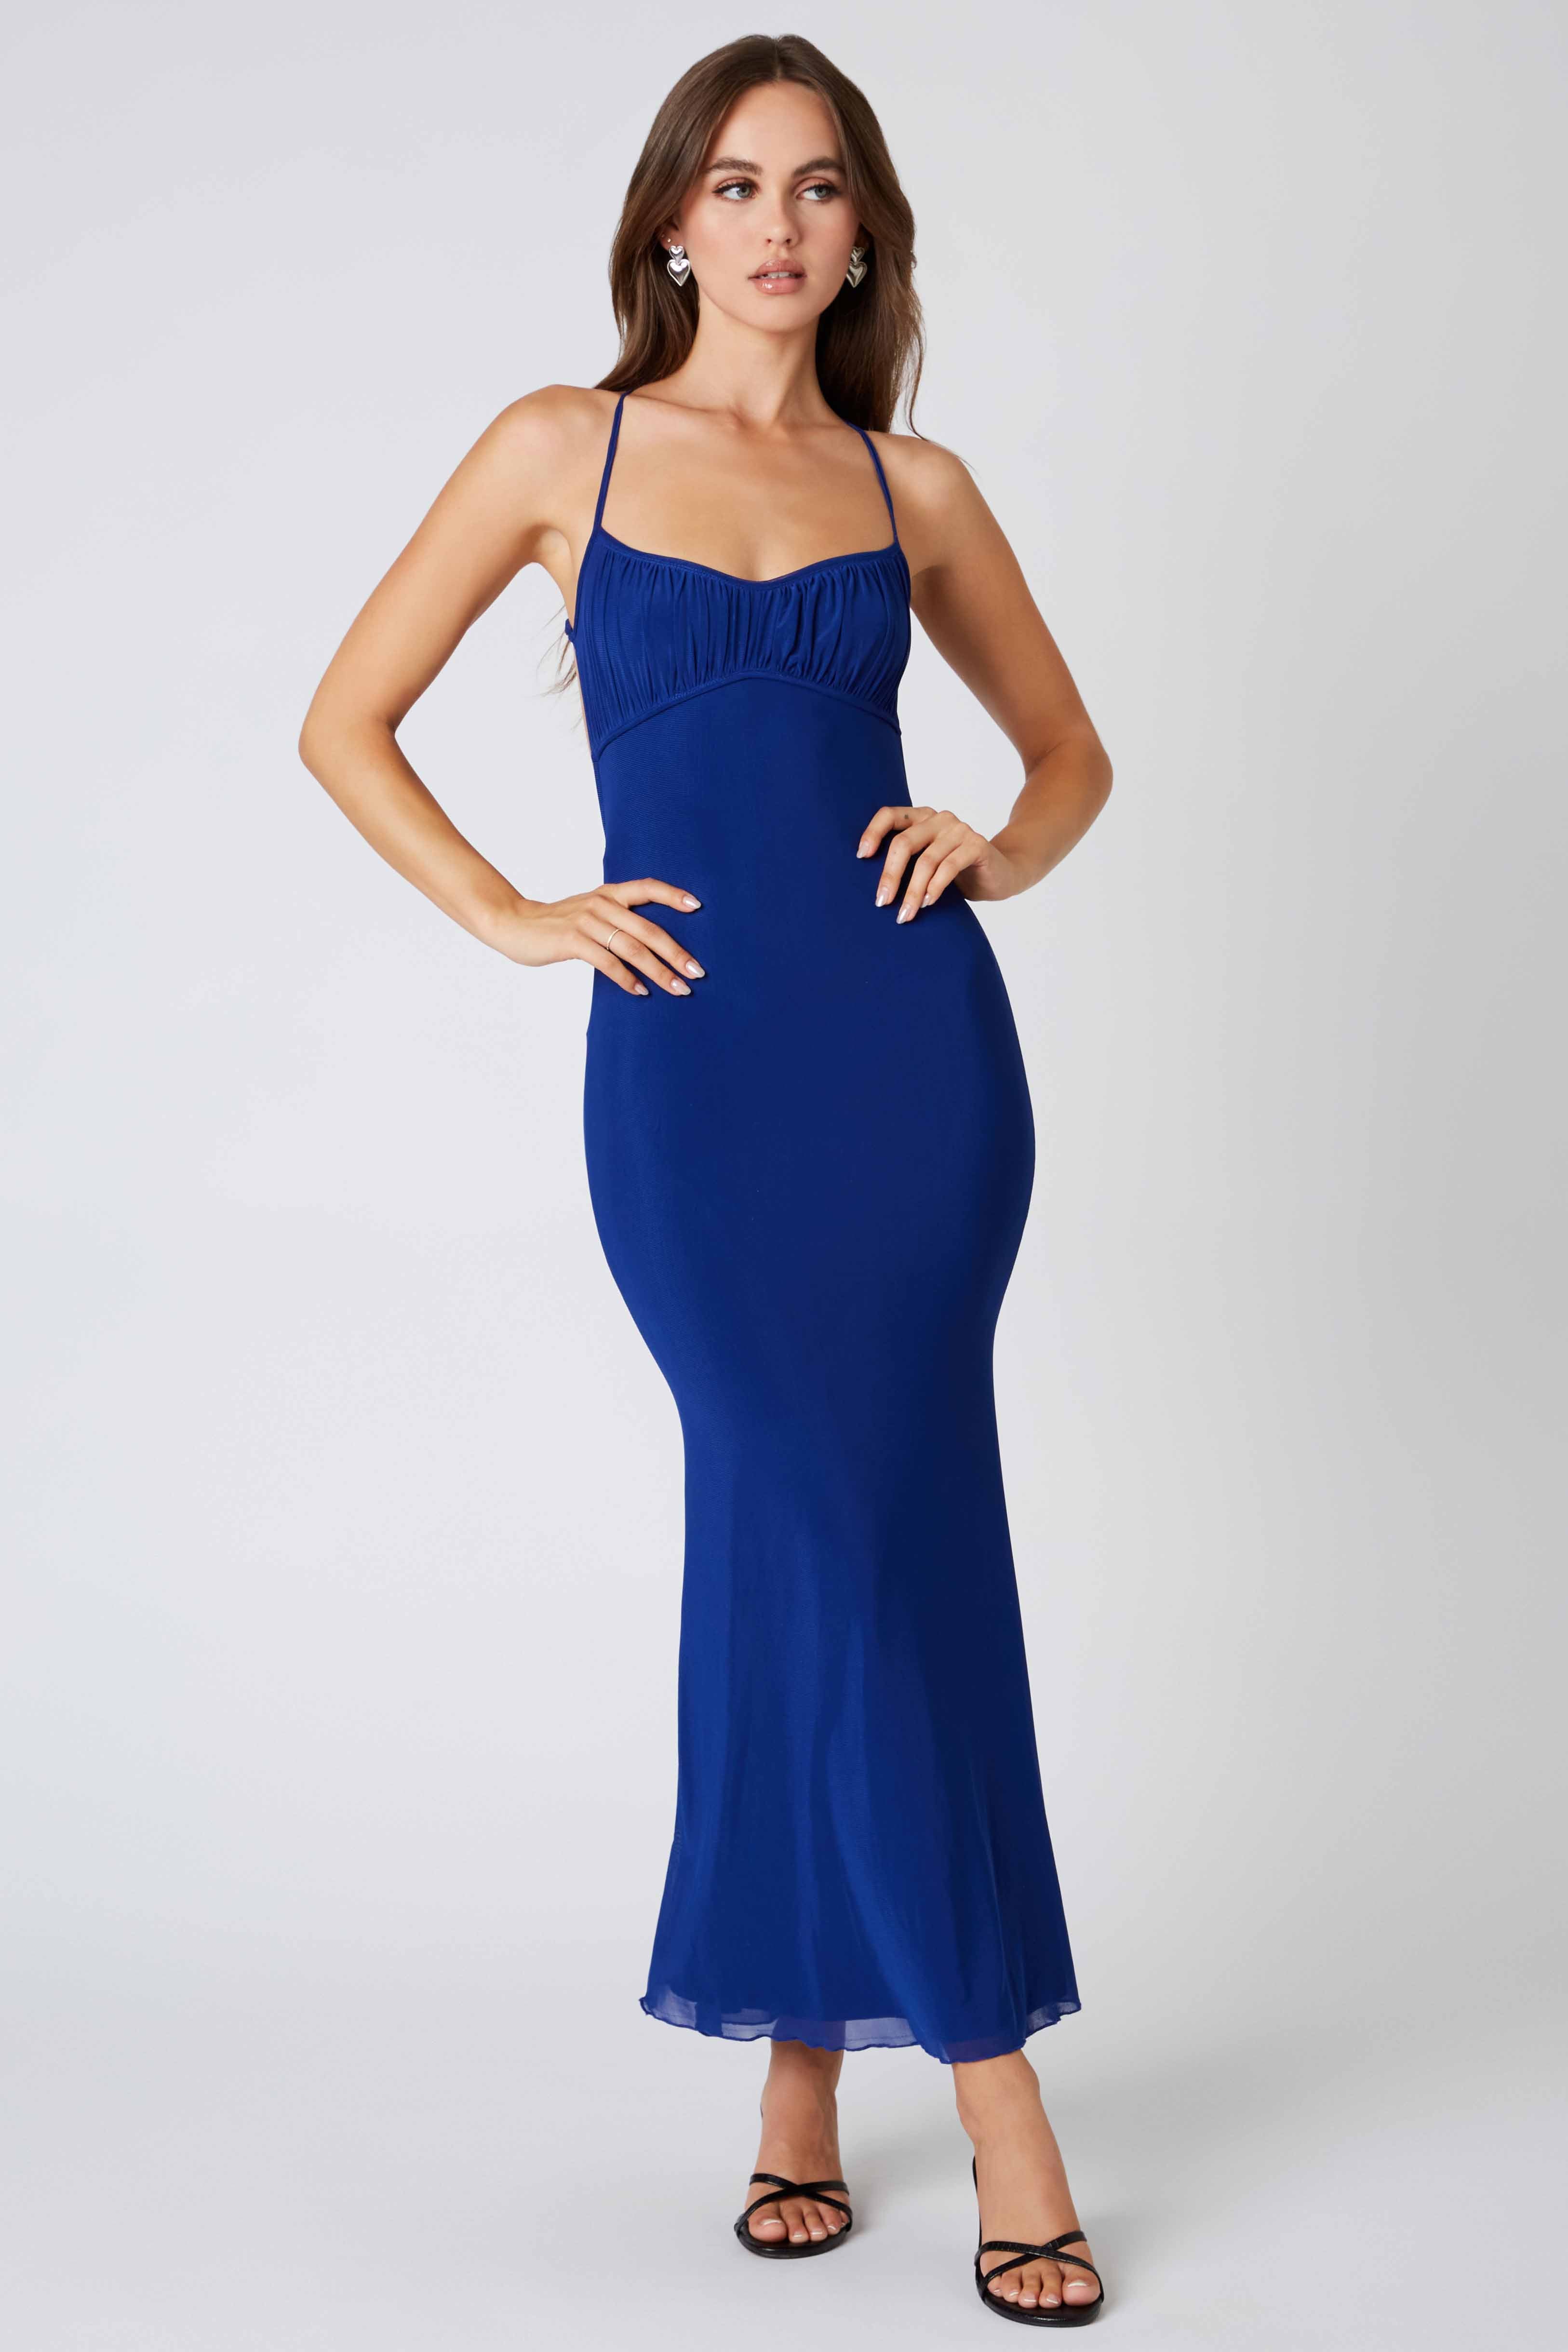 Mesh Cross Back Bodycon Maxi Dress in Cobalt Blue Front View